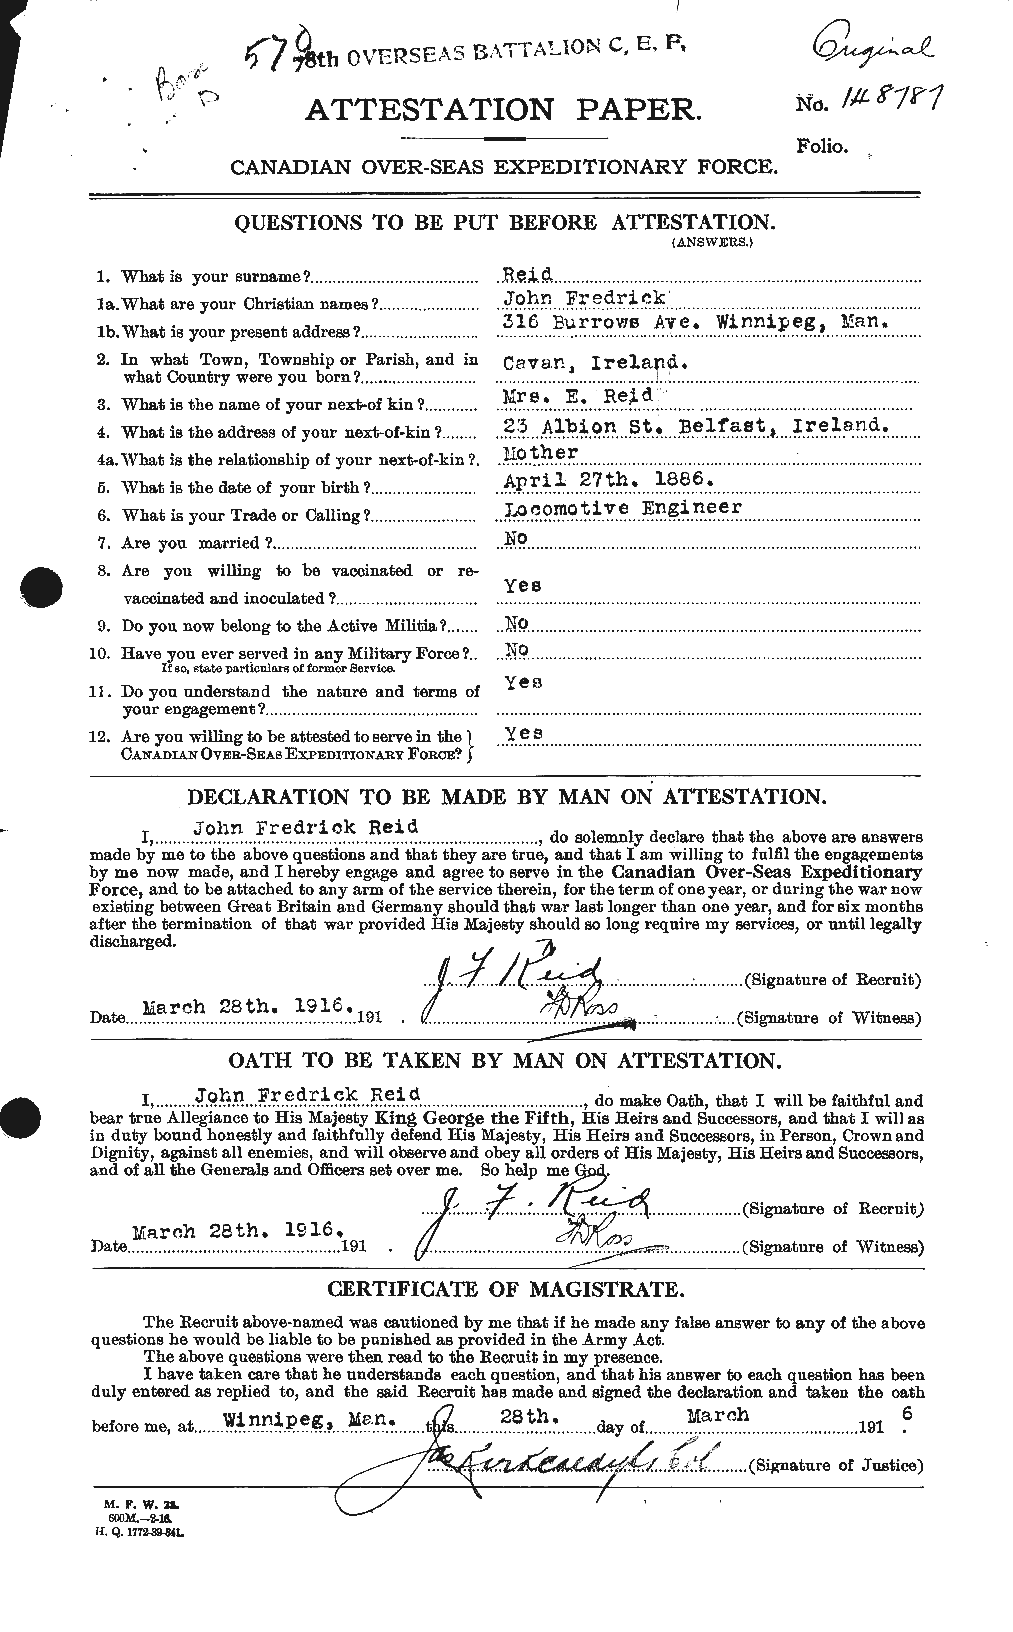 Personnel Records of the First World War - CEF 598838a